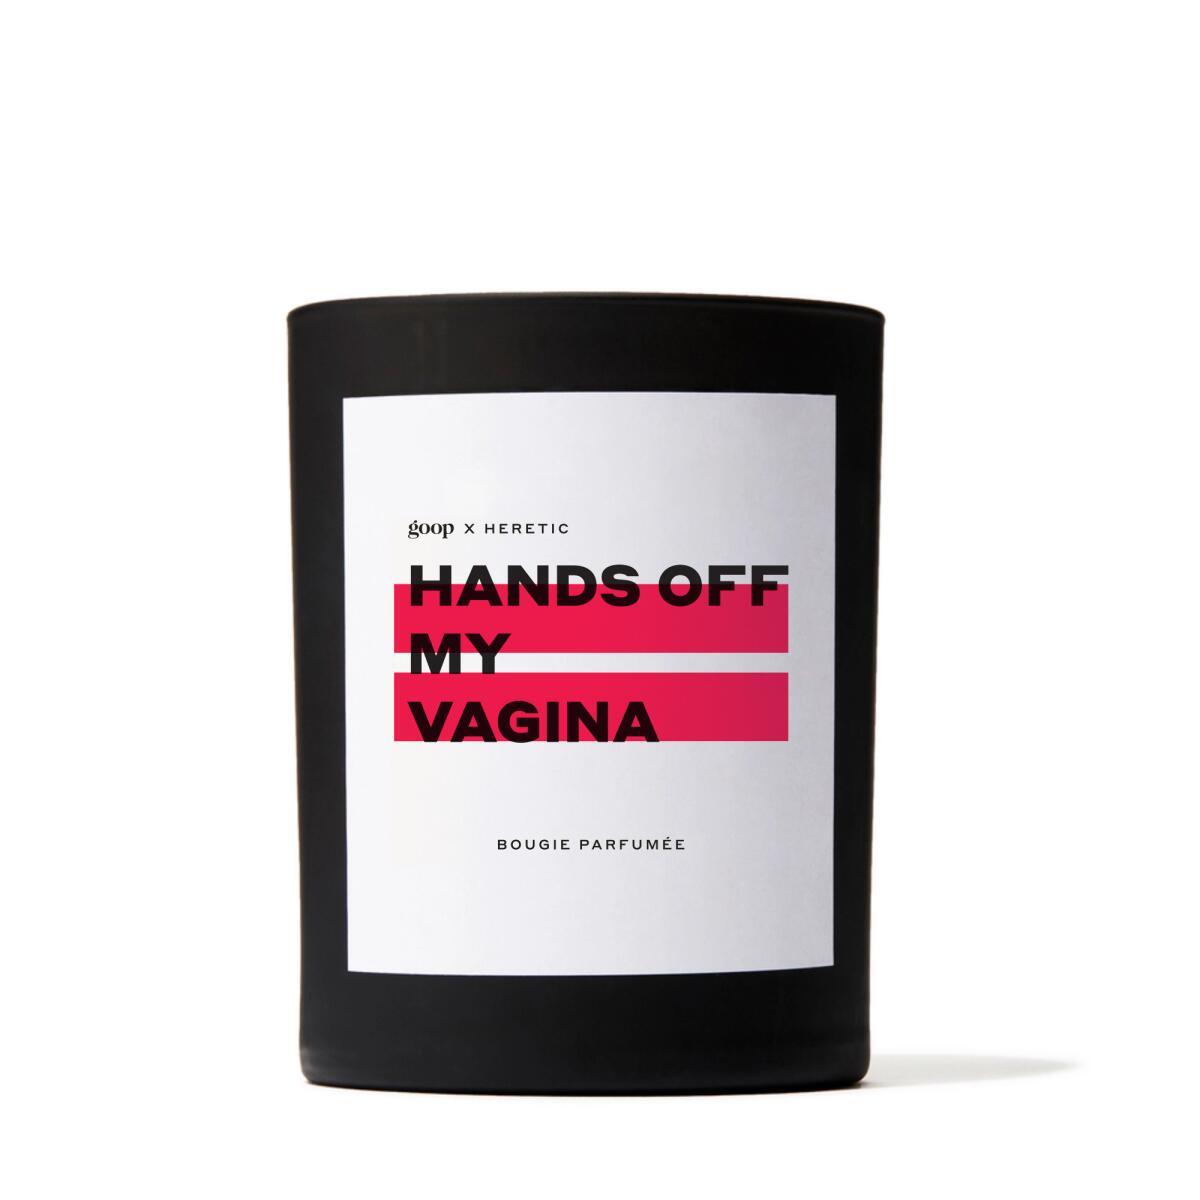 A round black candle with a white label that reads "Hands Off My Vagina."